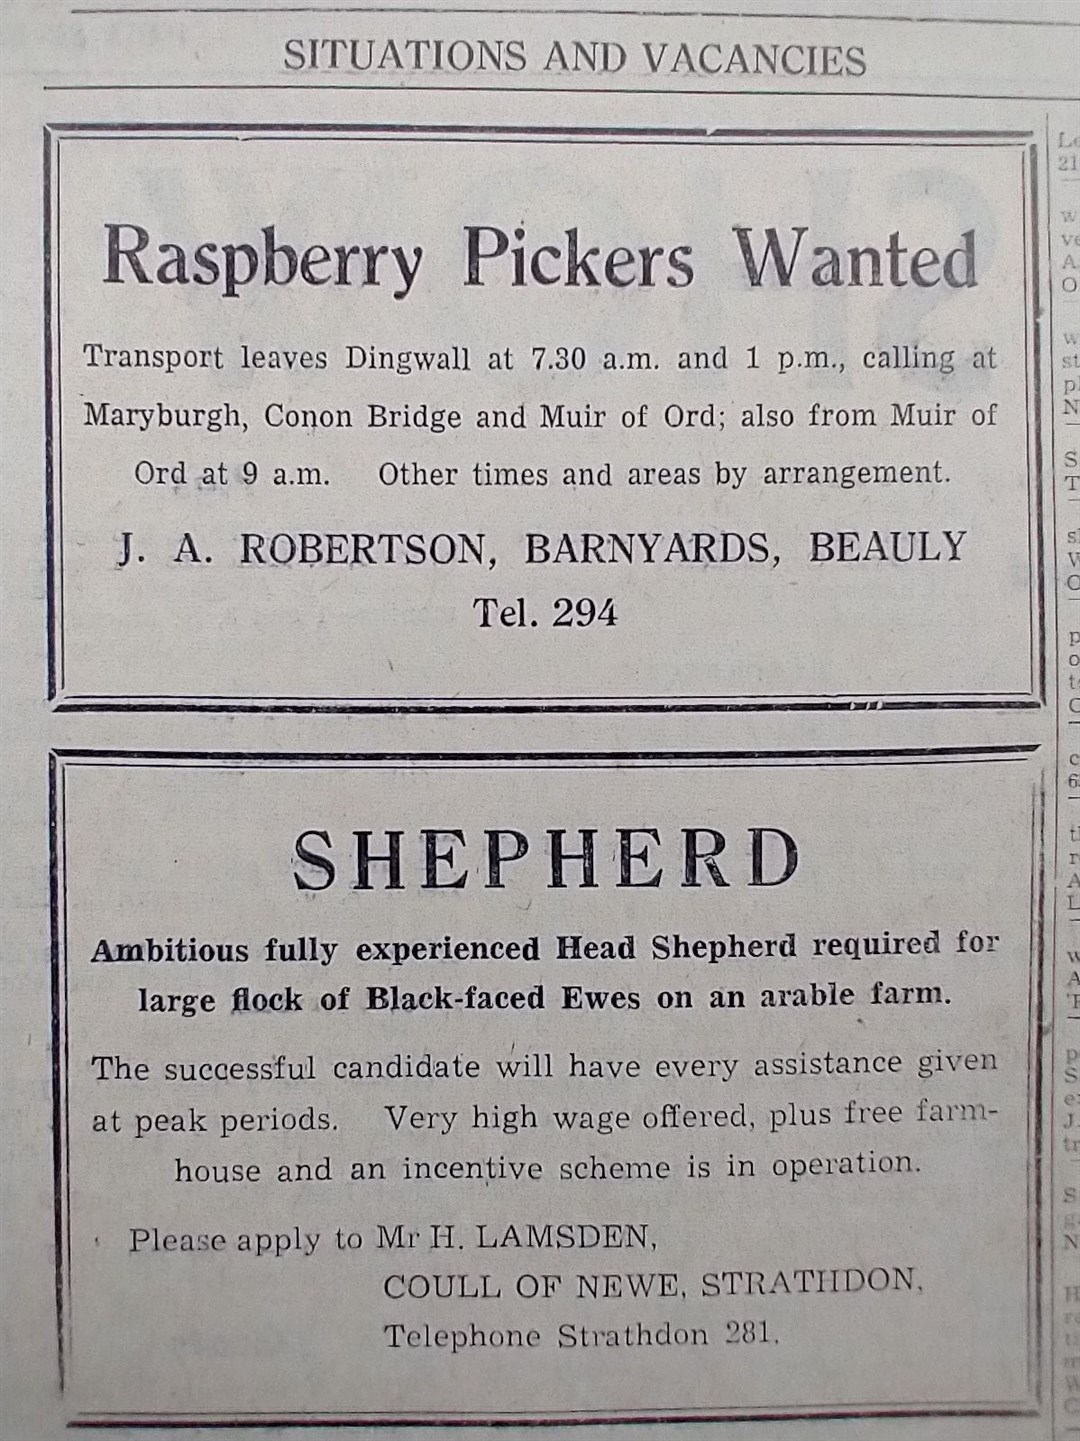 These posts were also up for grabs in Ross-shire half a century ago.